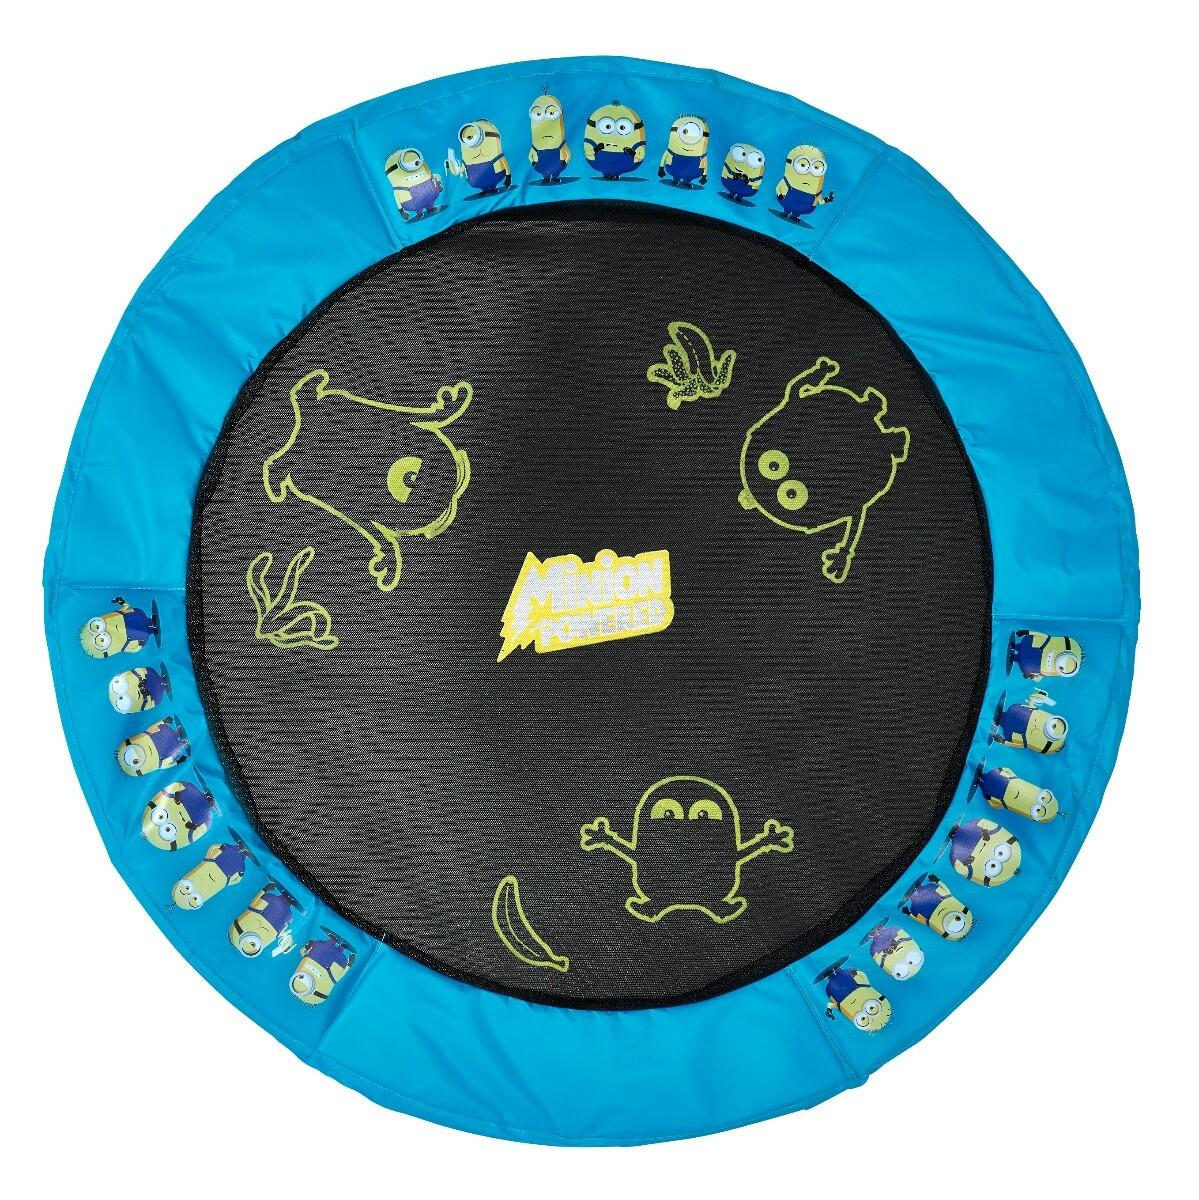 Plum Minions 4.5ft Minions Trampoline and Enclosure with Sounds 5/5